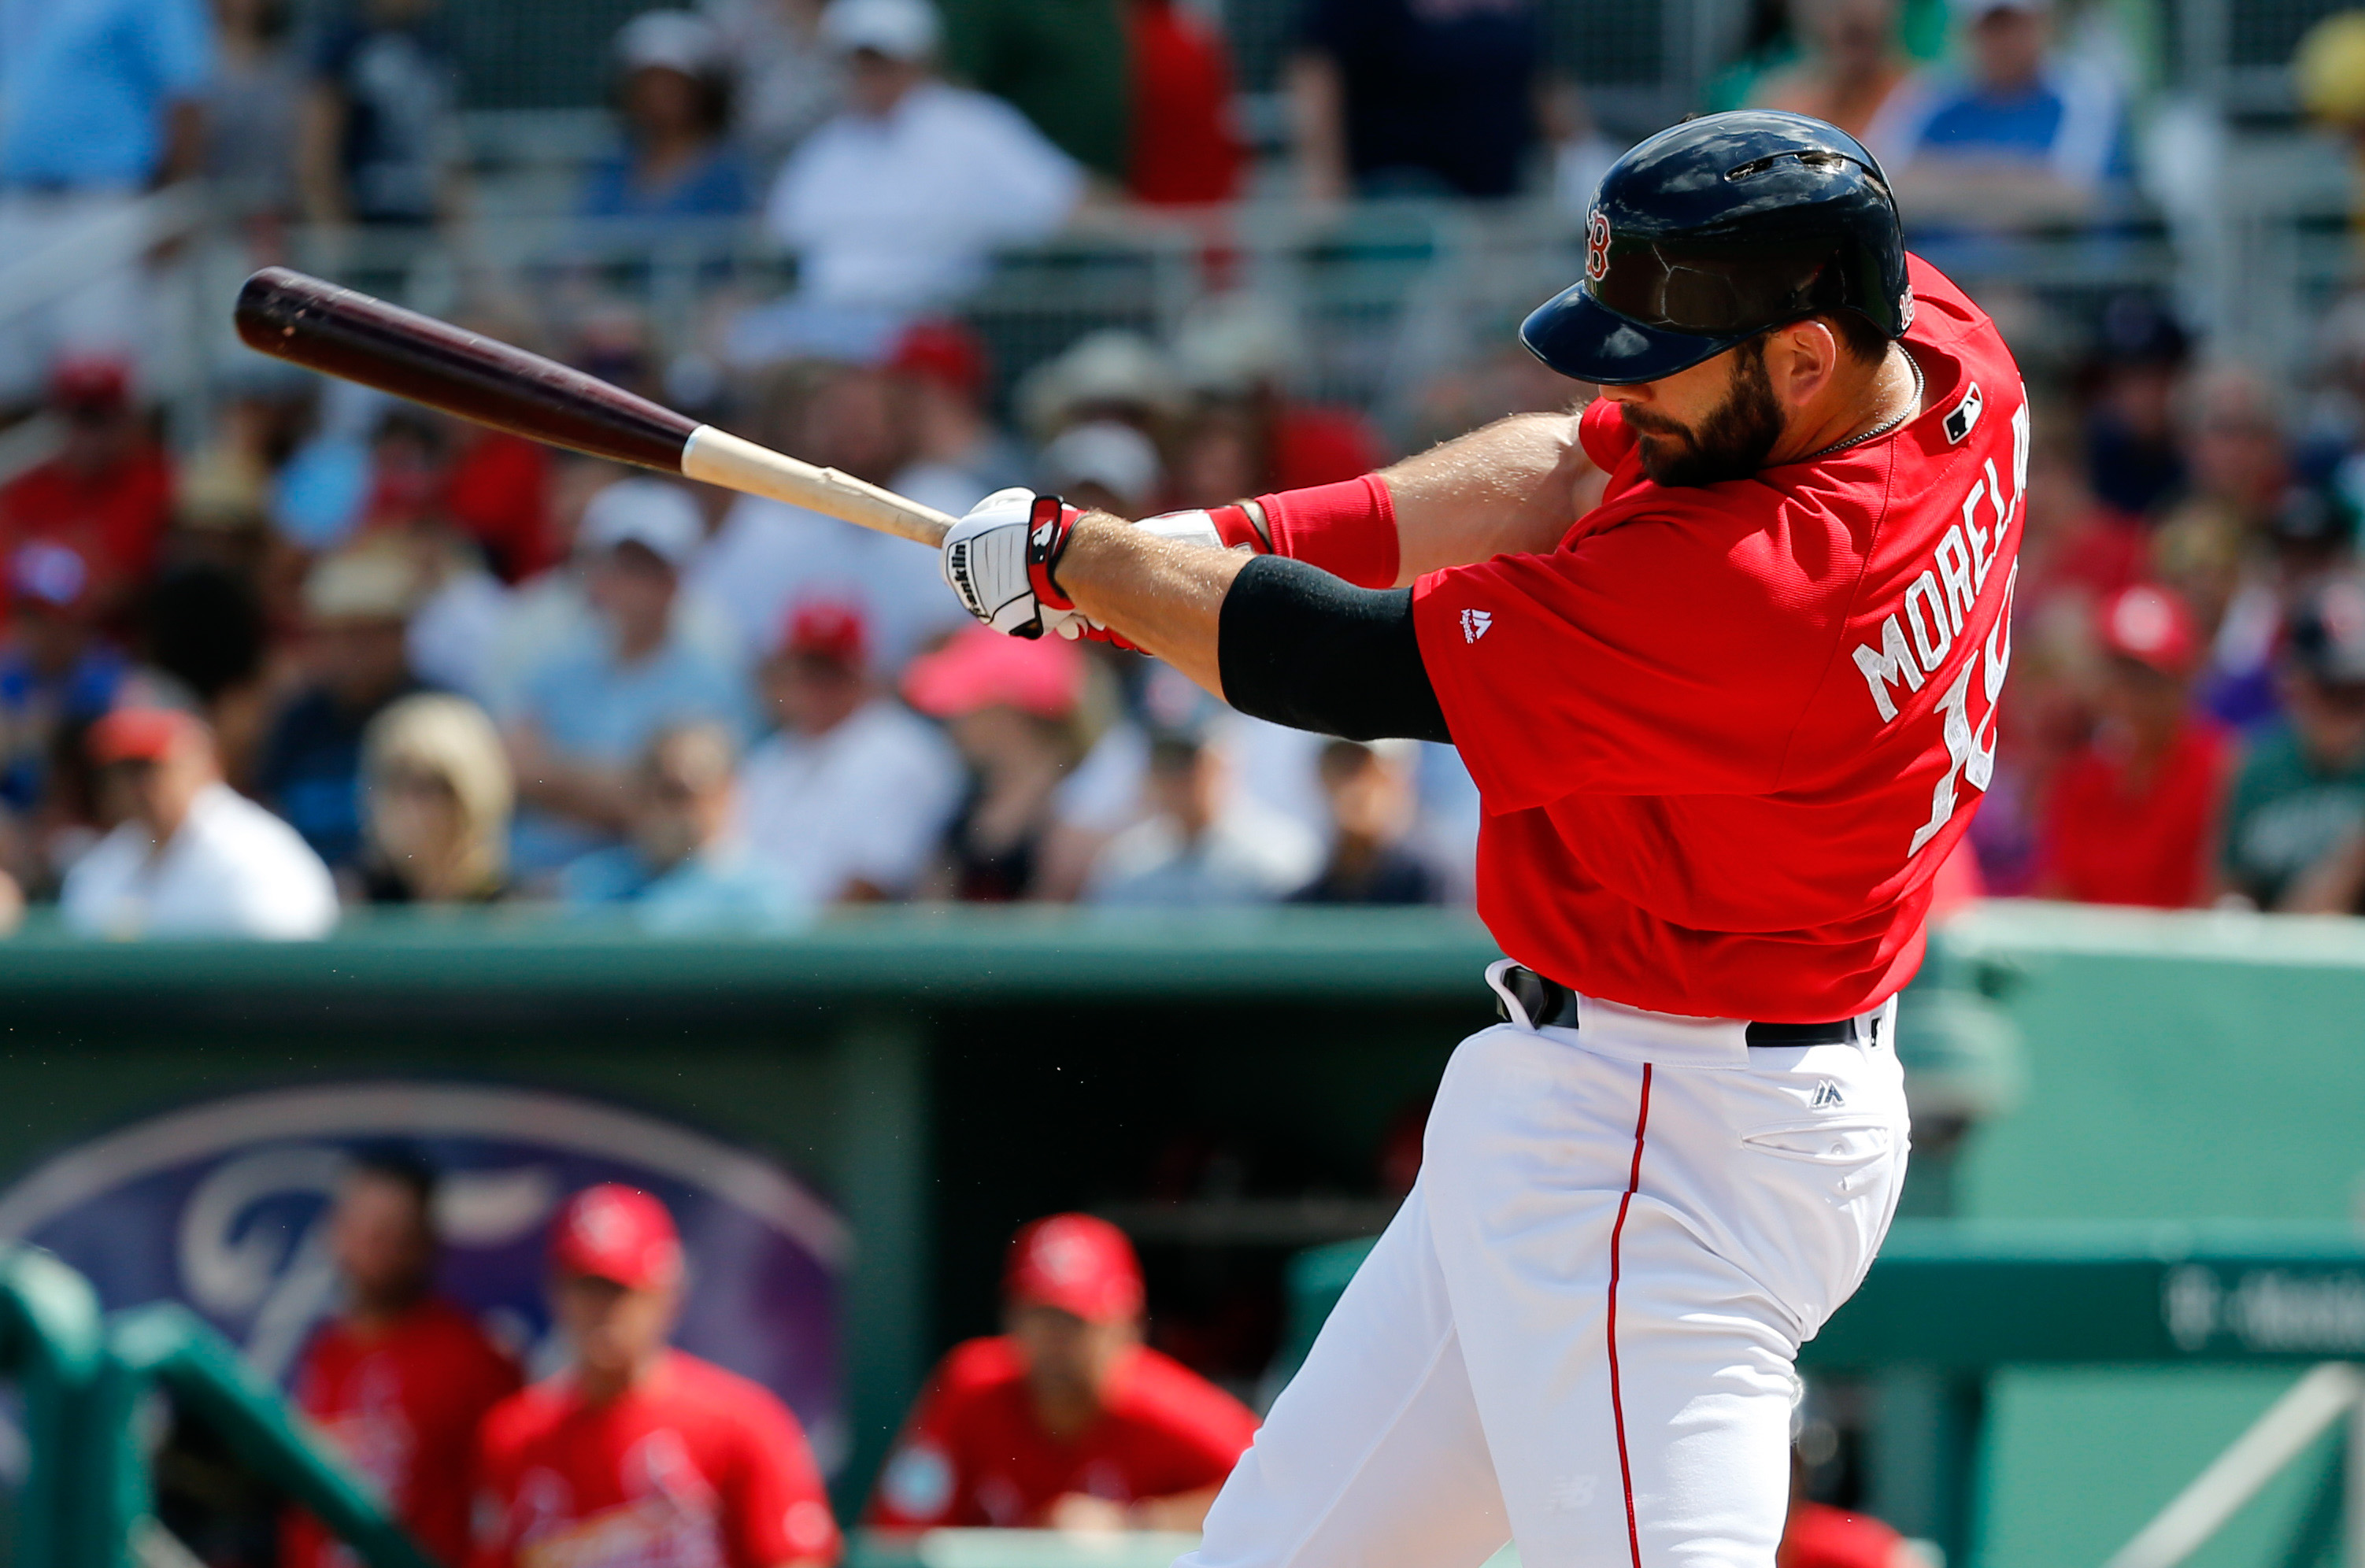 Boston Red Sox: Replacing One Bat Will Take a Village